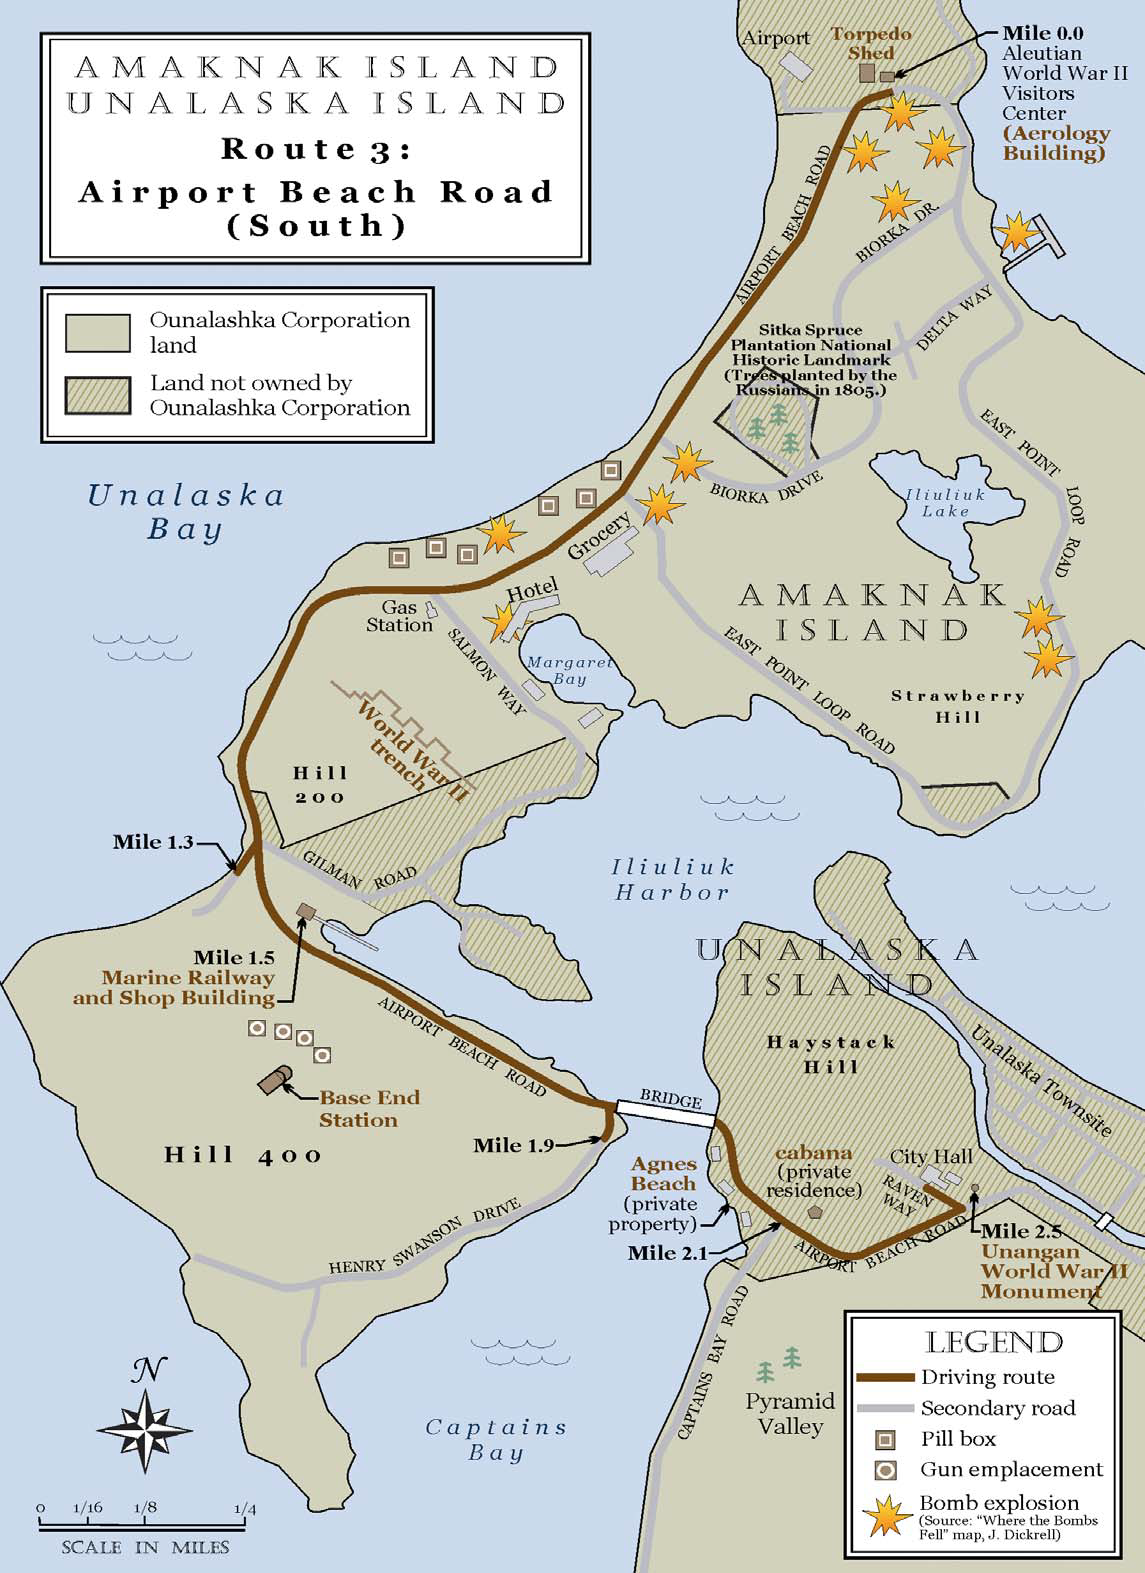 map of route from Amaknak Island to Unalaska Island highlighting 5 points along the way